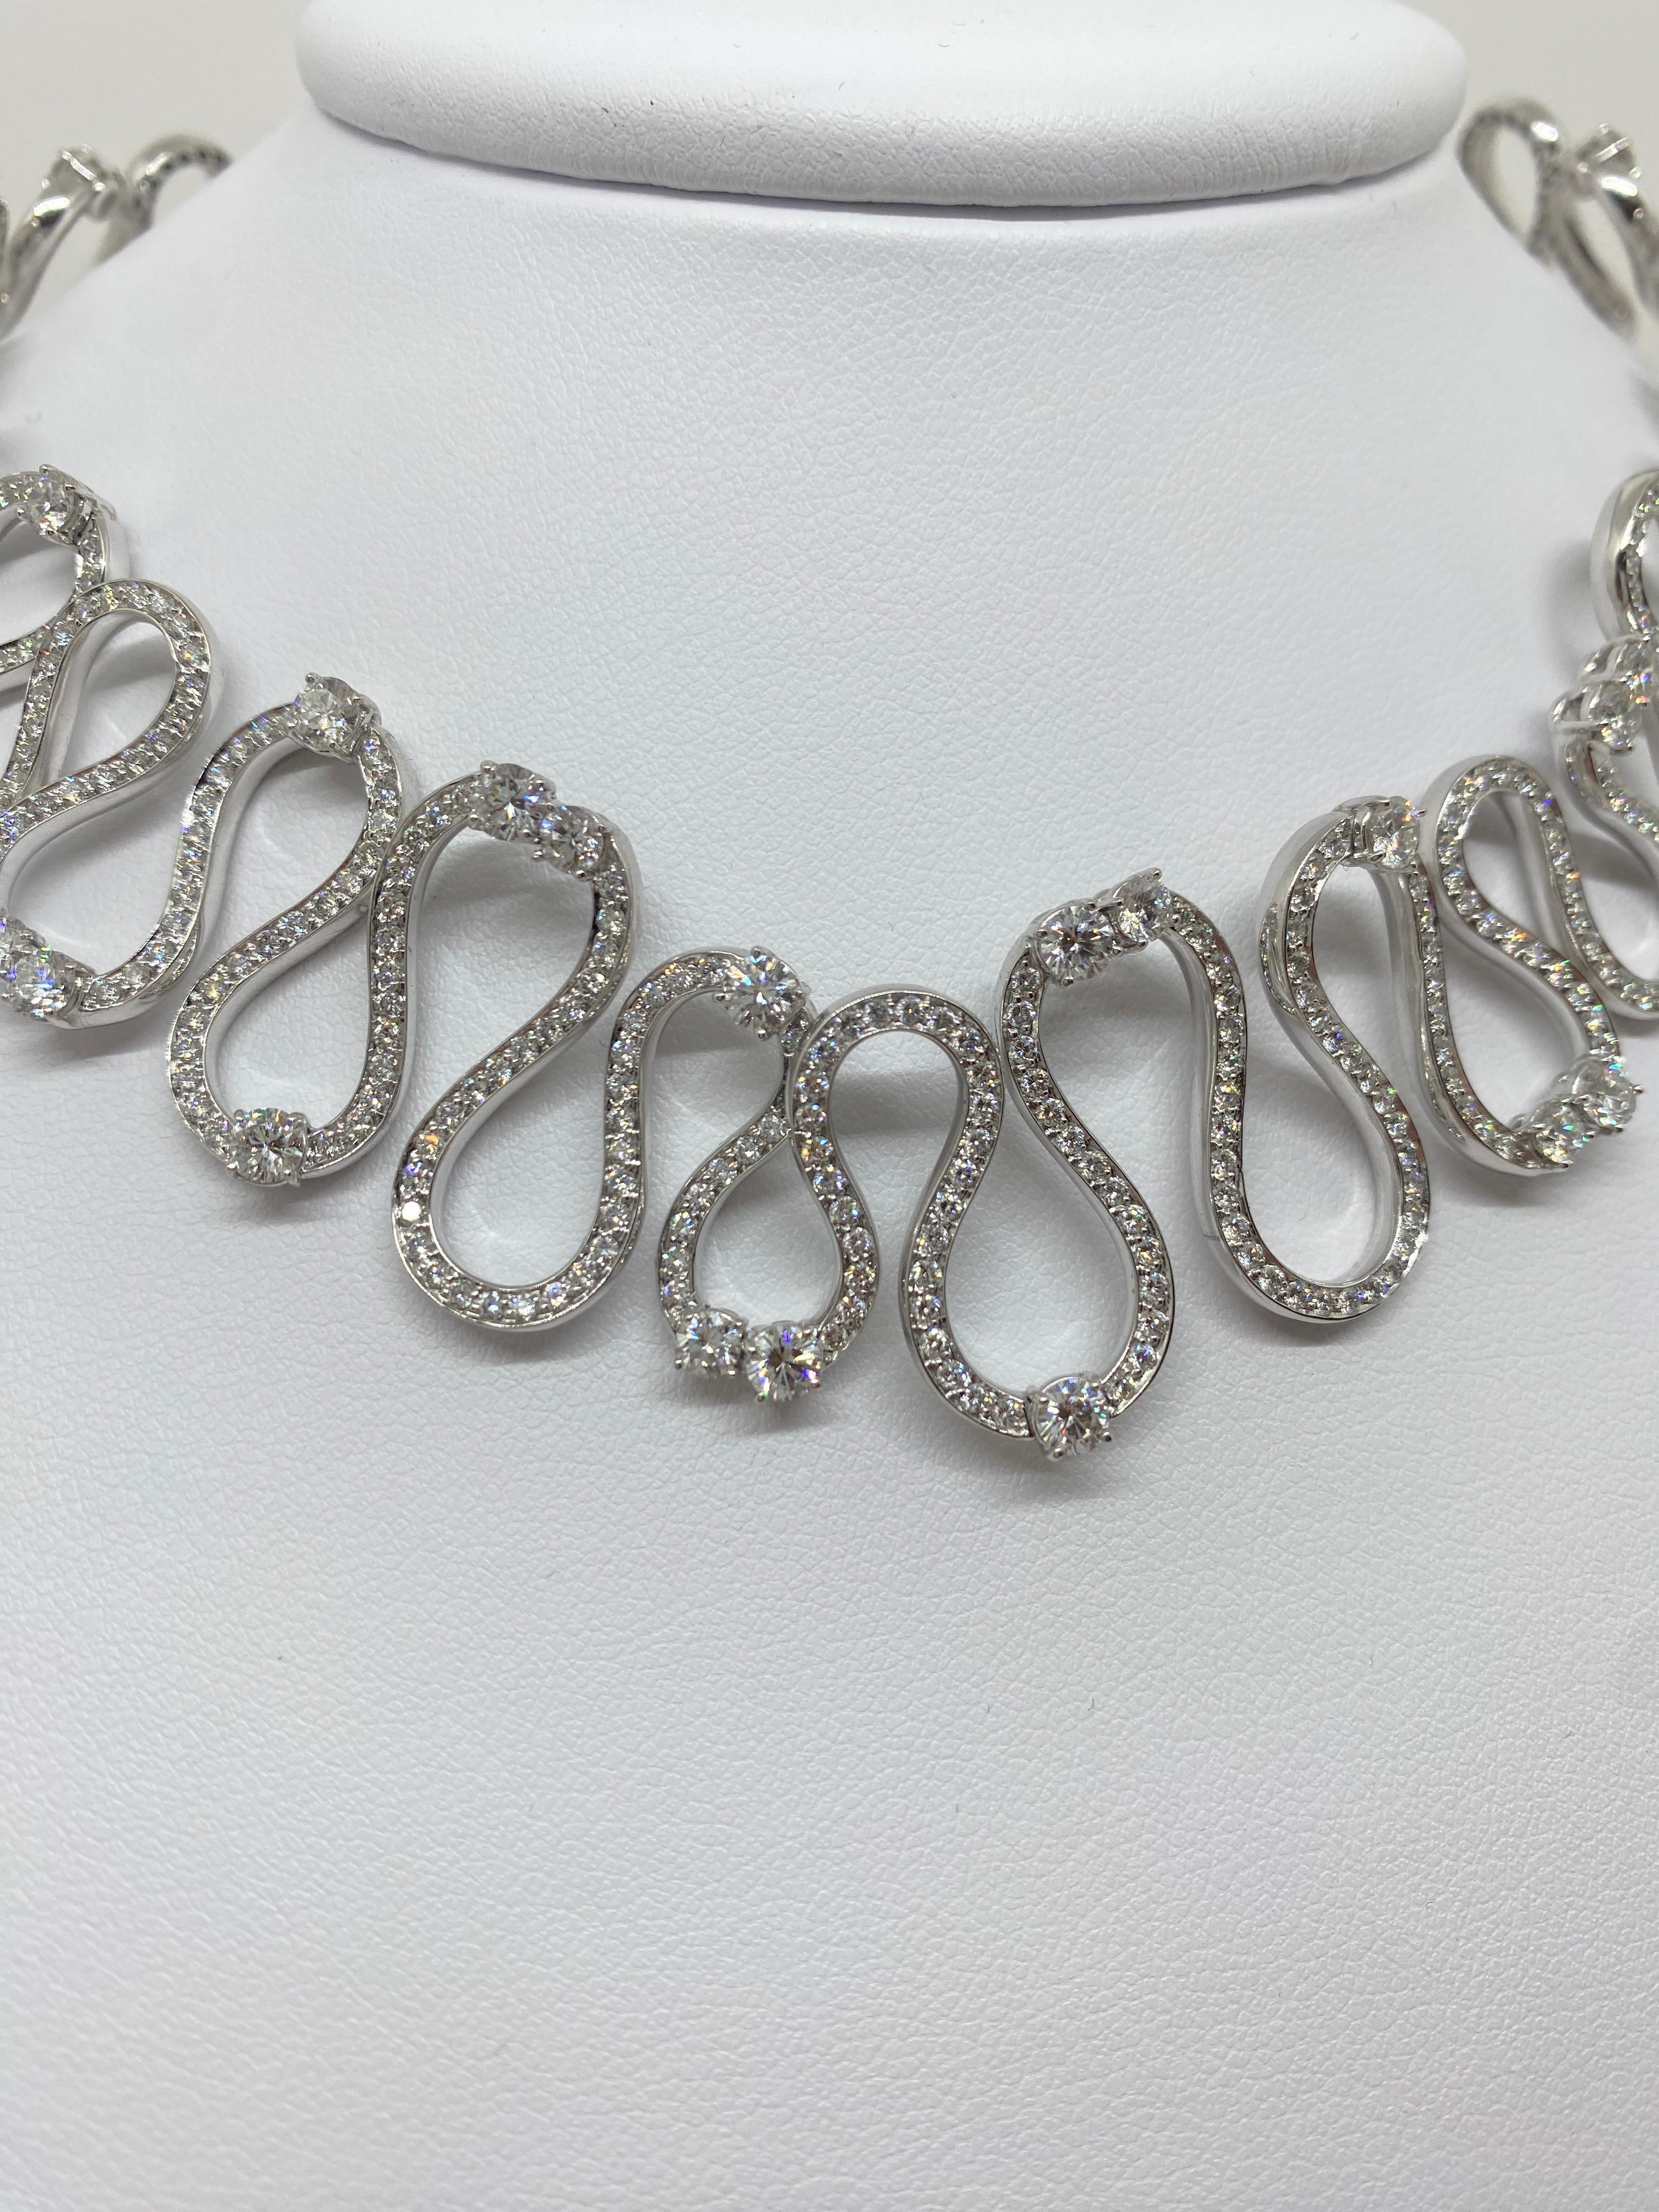 One of a Kind 18 Kt White Gold Cantamessa Queen Necklace 15.64 Ct White Diamonds For Sale 1